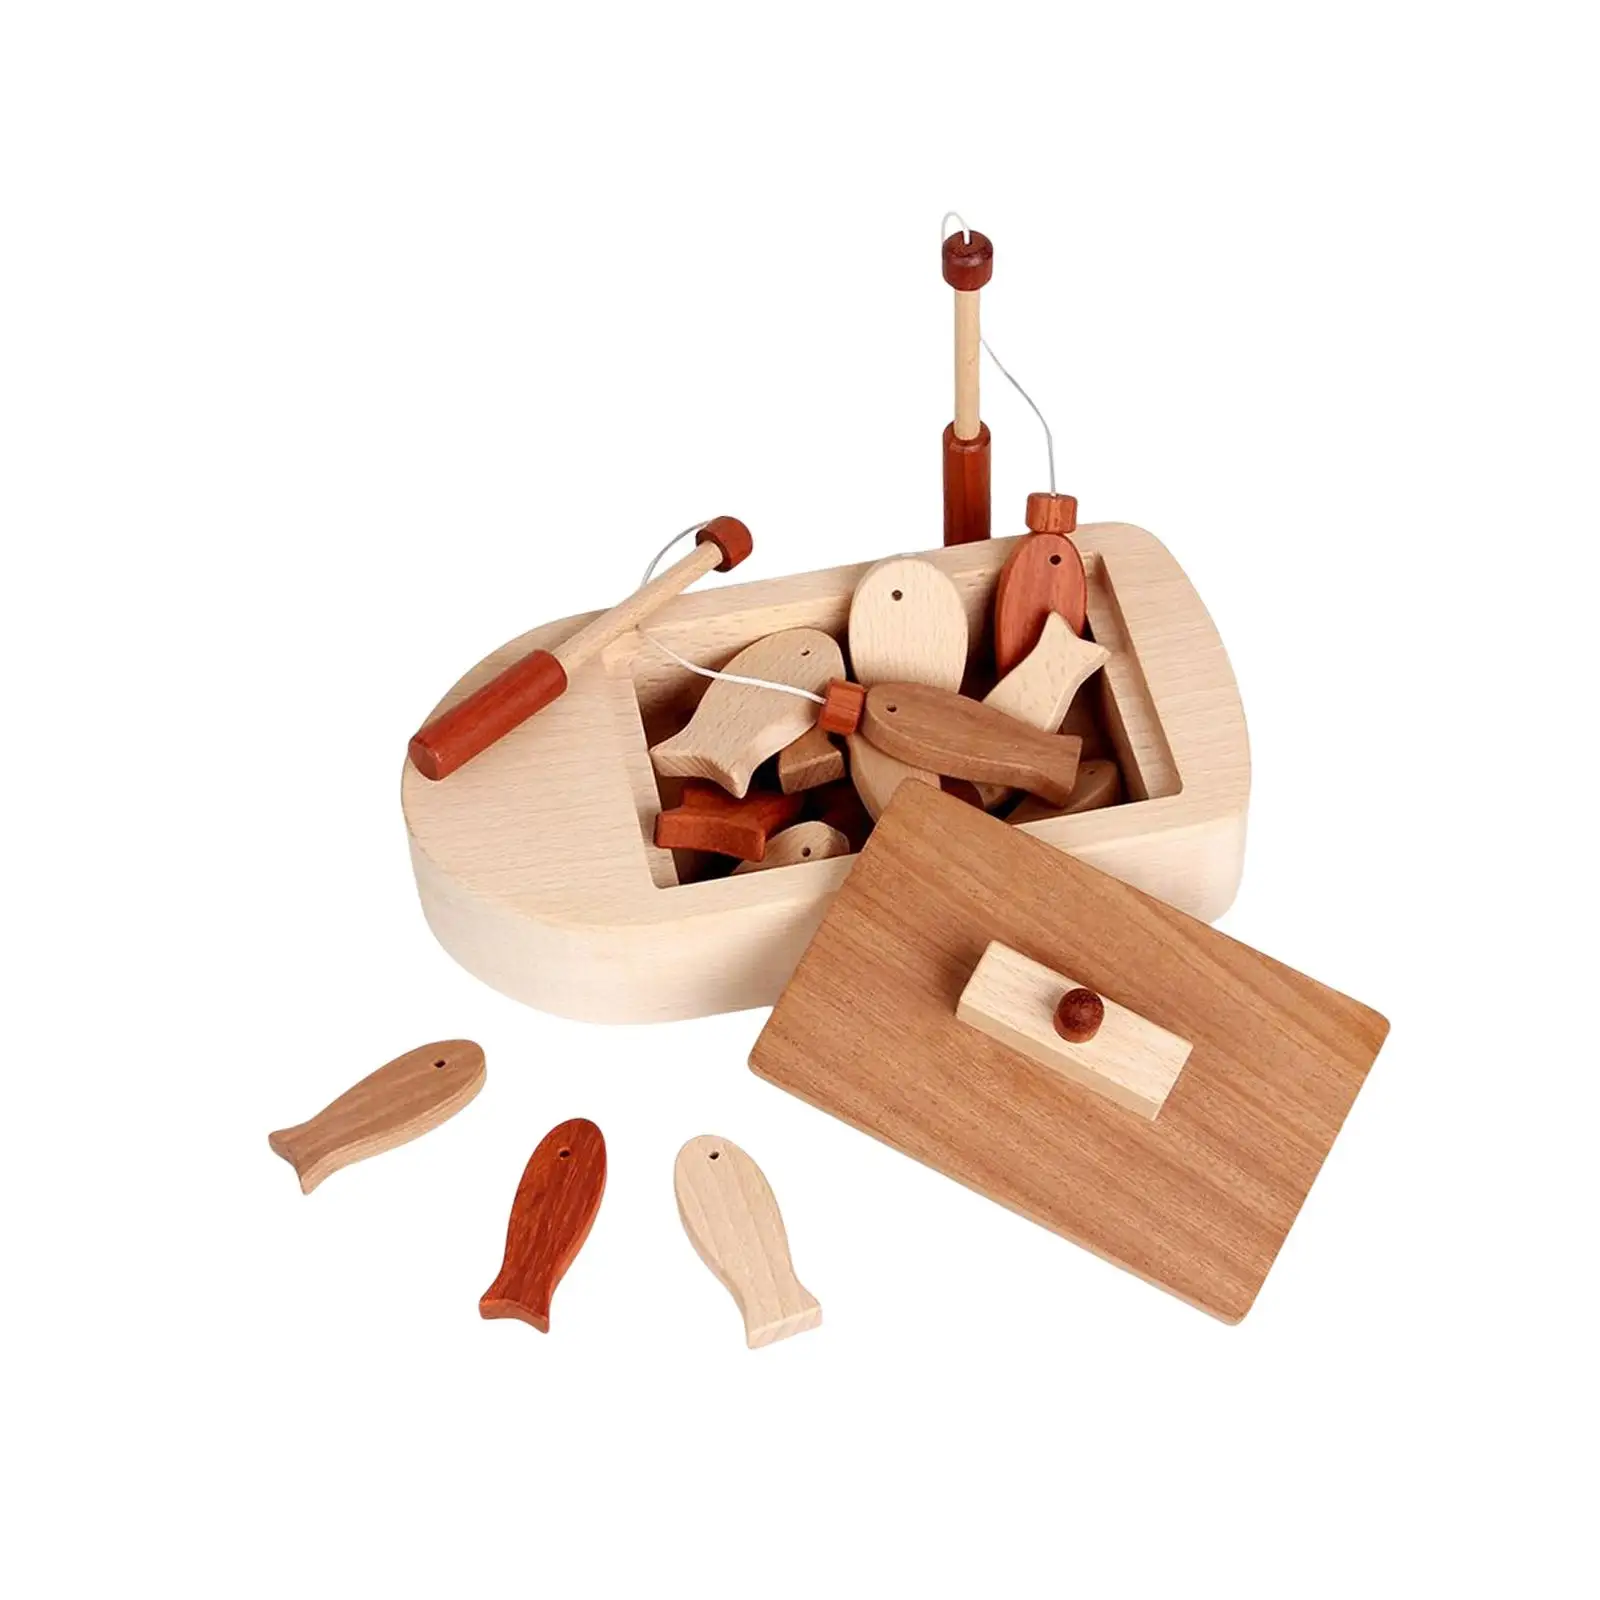 Wooden Fishing Game Play Set with Fishing Poles Fish Catching Enlightenment for Children